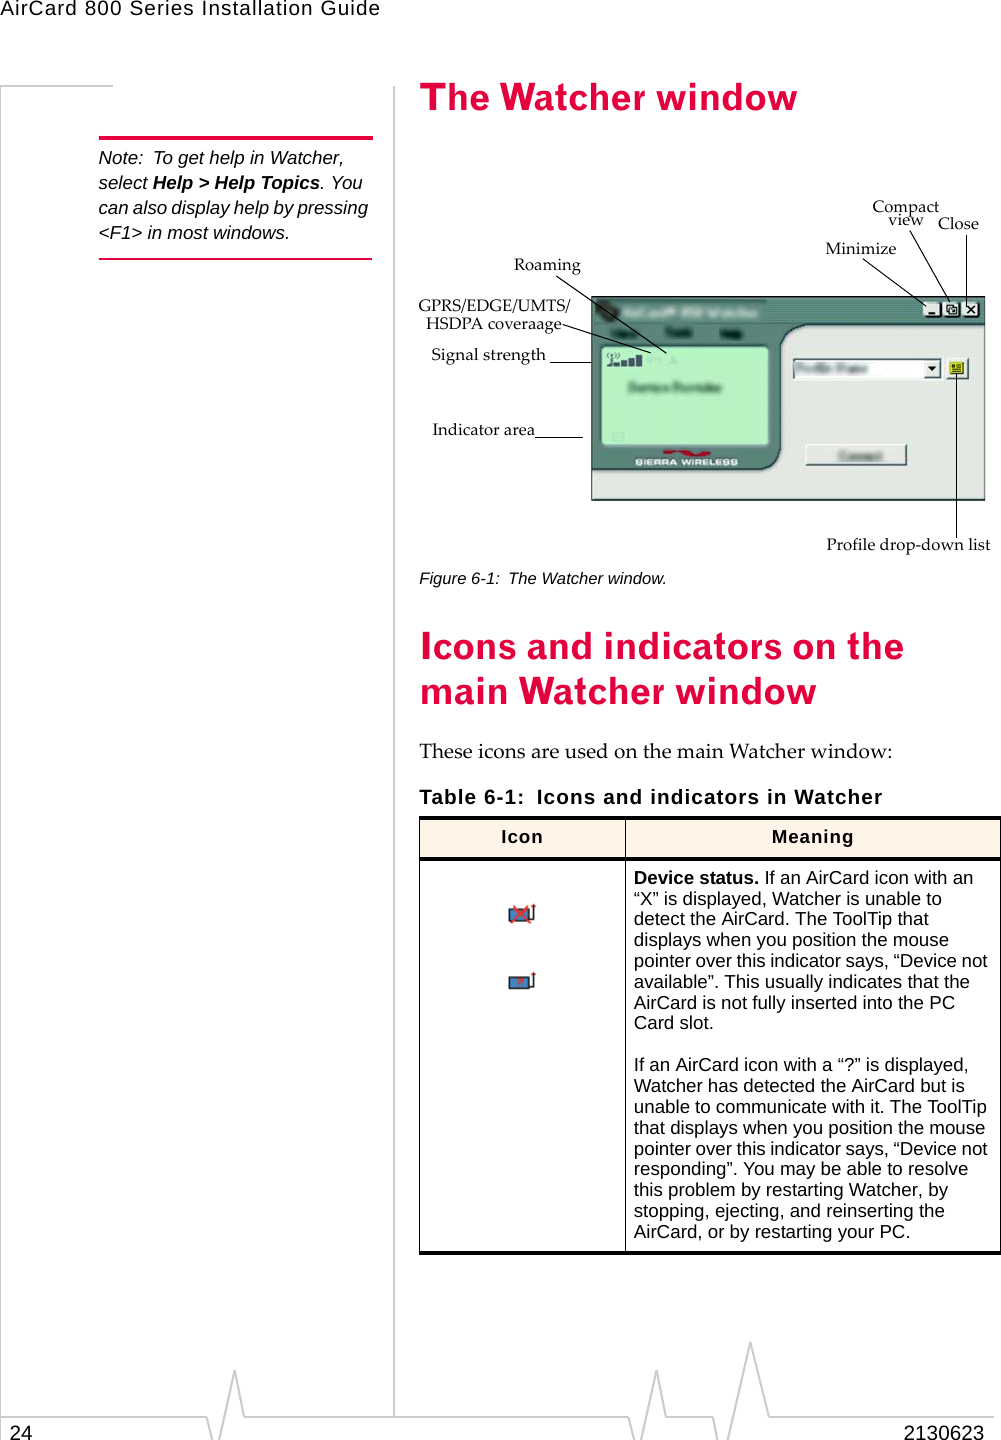 AirCard 800 Series Installation Guide24 2130623The Watcher windowNote: To get help in Watcher, select Help &gt; Help Topics. You can also display help by pressing &lt;F1&gt; in most windows.Figure 6-1: The Watcher window.Icons and indicators on the main Watcher windowThese icons are used on the main Watcher window:Table 6-1: Icons and indicators in WatcherIcon MeaningDevice status. If an AirCard icon with an “X” is displayed, Watcher is unable to detect the AirCard. The ToolTip that displays when you position the mouse pointer over this indicator says, “Device not available”. This usually indicates that the AirCard is not fully inserted into the PC Card slot.If an AirCard icon with a “?” is displayed, Watcher has detected the AirCard but is unable to communicate with it. The ToolTip that displays when you position the mouse pointer over this indicator says, “Device not responding”. You may be able to resolve this problem by restarting Watcher, by stopping, ejecting, and reinserting the AirCard, or by restarting your PC.Indicator areaProfile drop-down listRoamingGPRS/EDGE/UMTS/CompactCloseMinimizeviewSignal strengthHSDPA coveraage